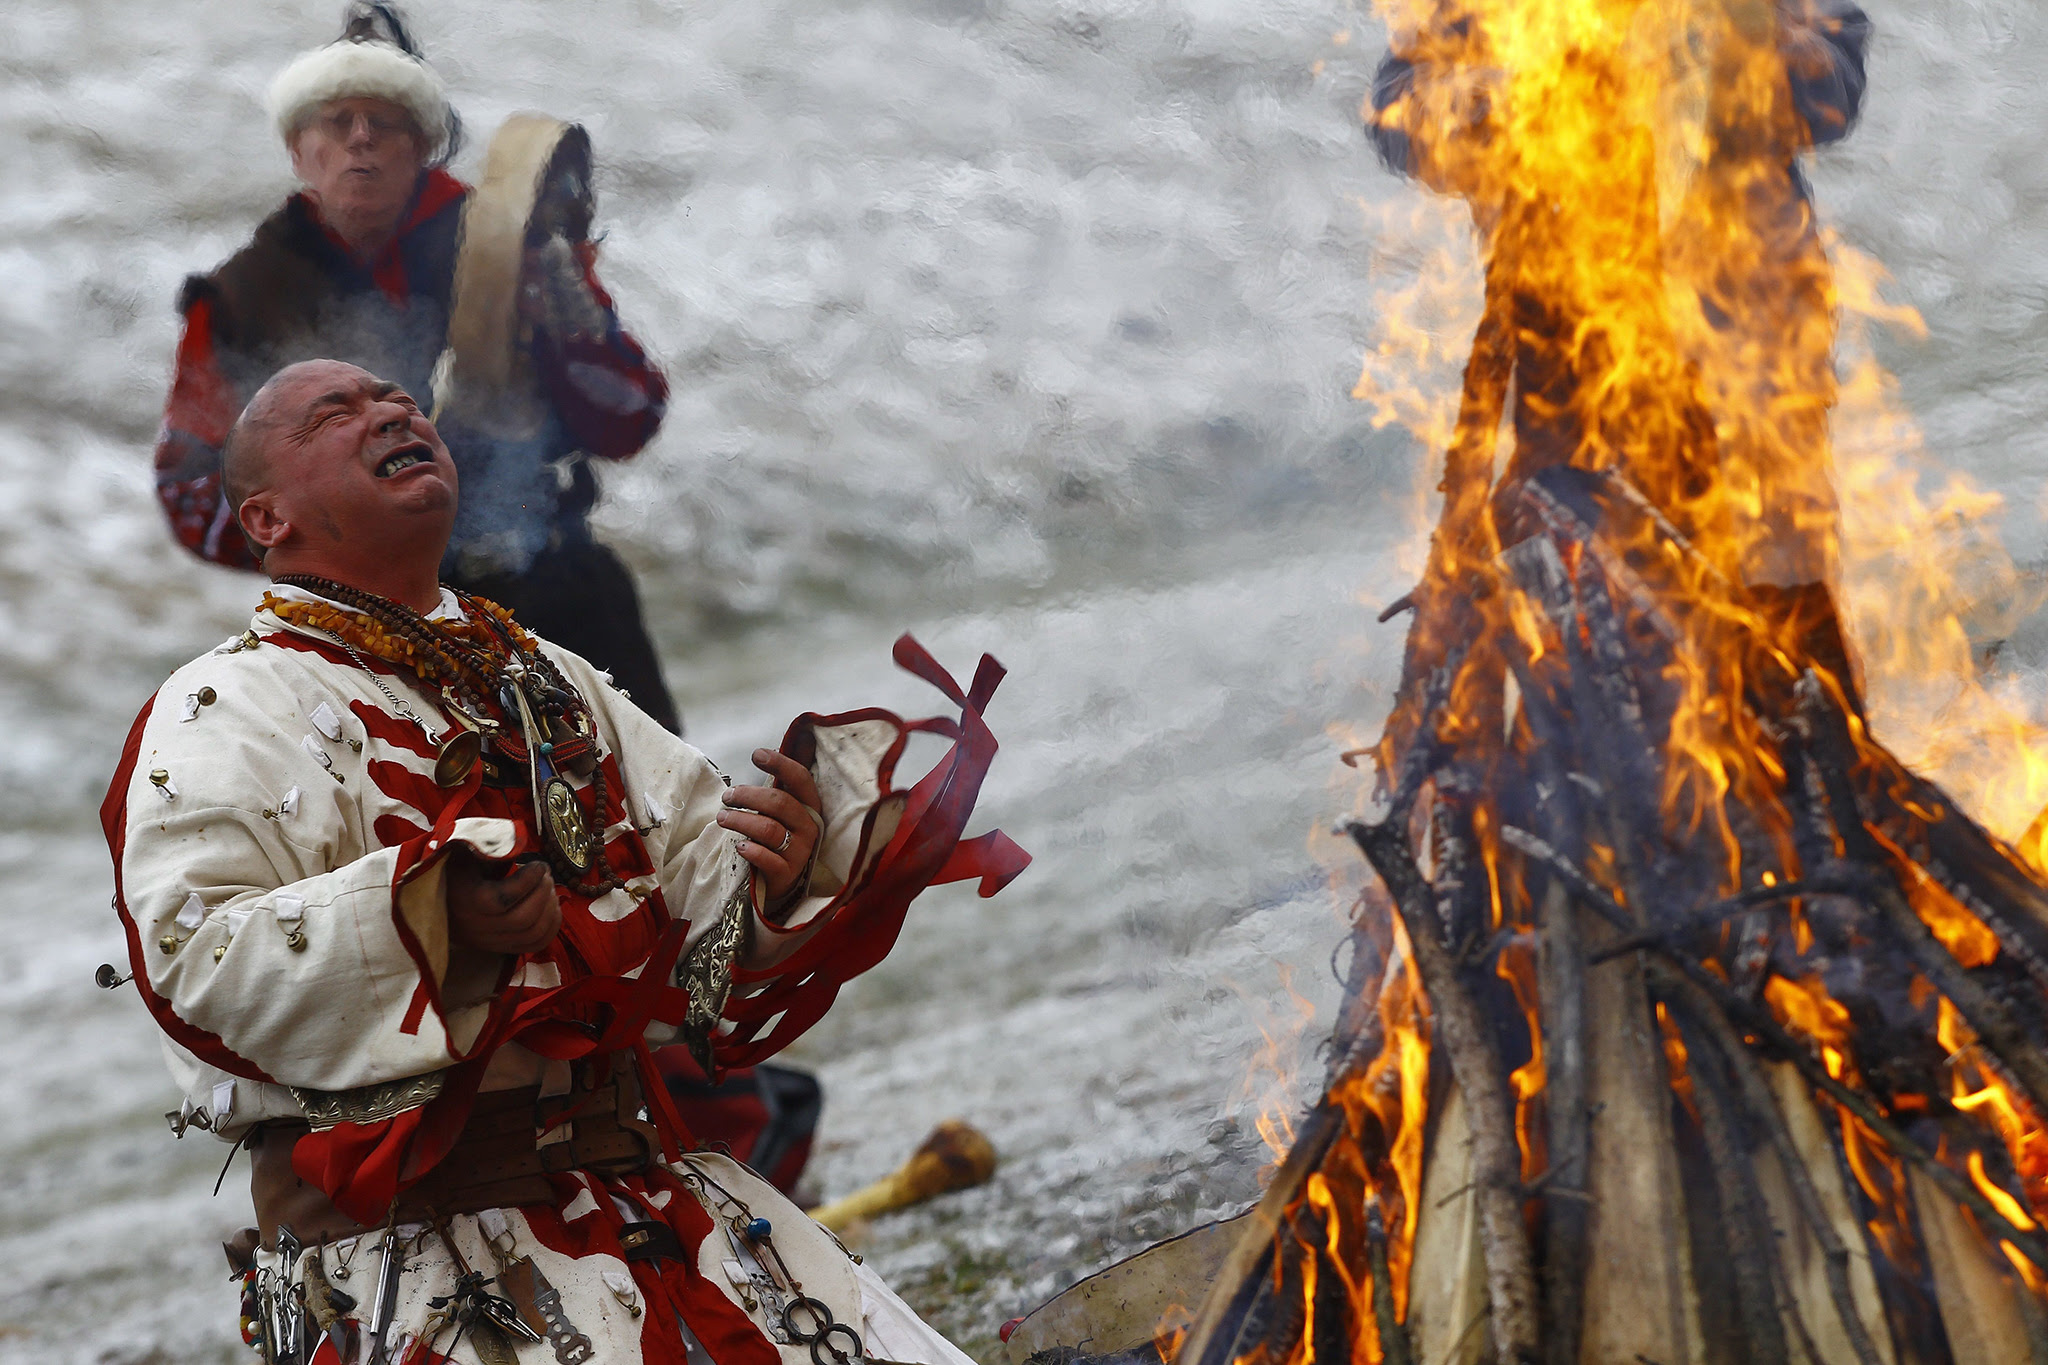 ungarian Artist Miklos Zoltan Baji performs a shamanic ritual around a bonfire during winter solstice celebrations in Bekescsaba, 200 kms southeast of Budapest, Hungary, Wednesday, Dec 21, 2016, on the shortest day of the year. (Peter Lehoczky/MTI via AP)